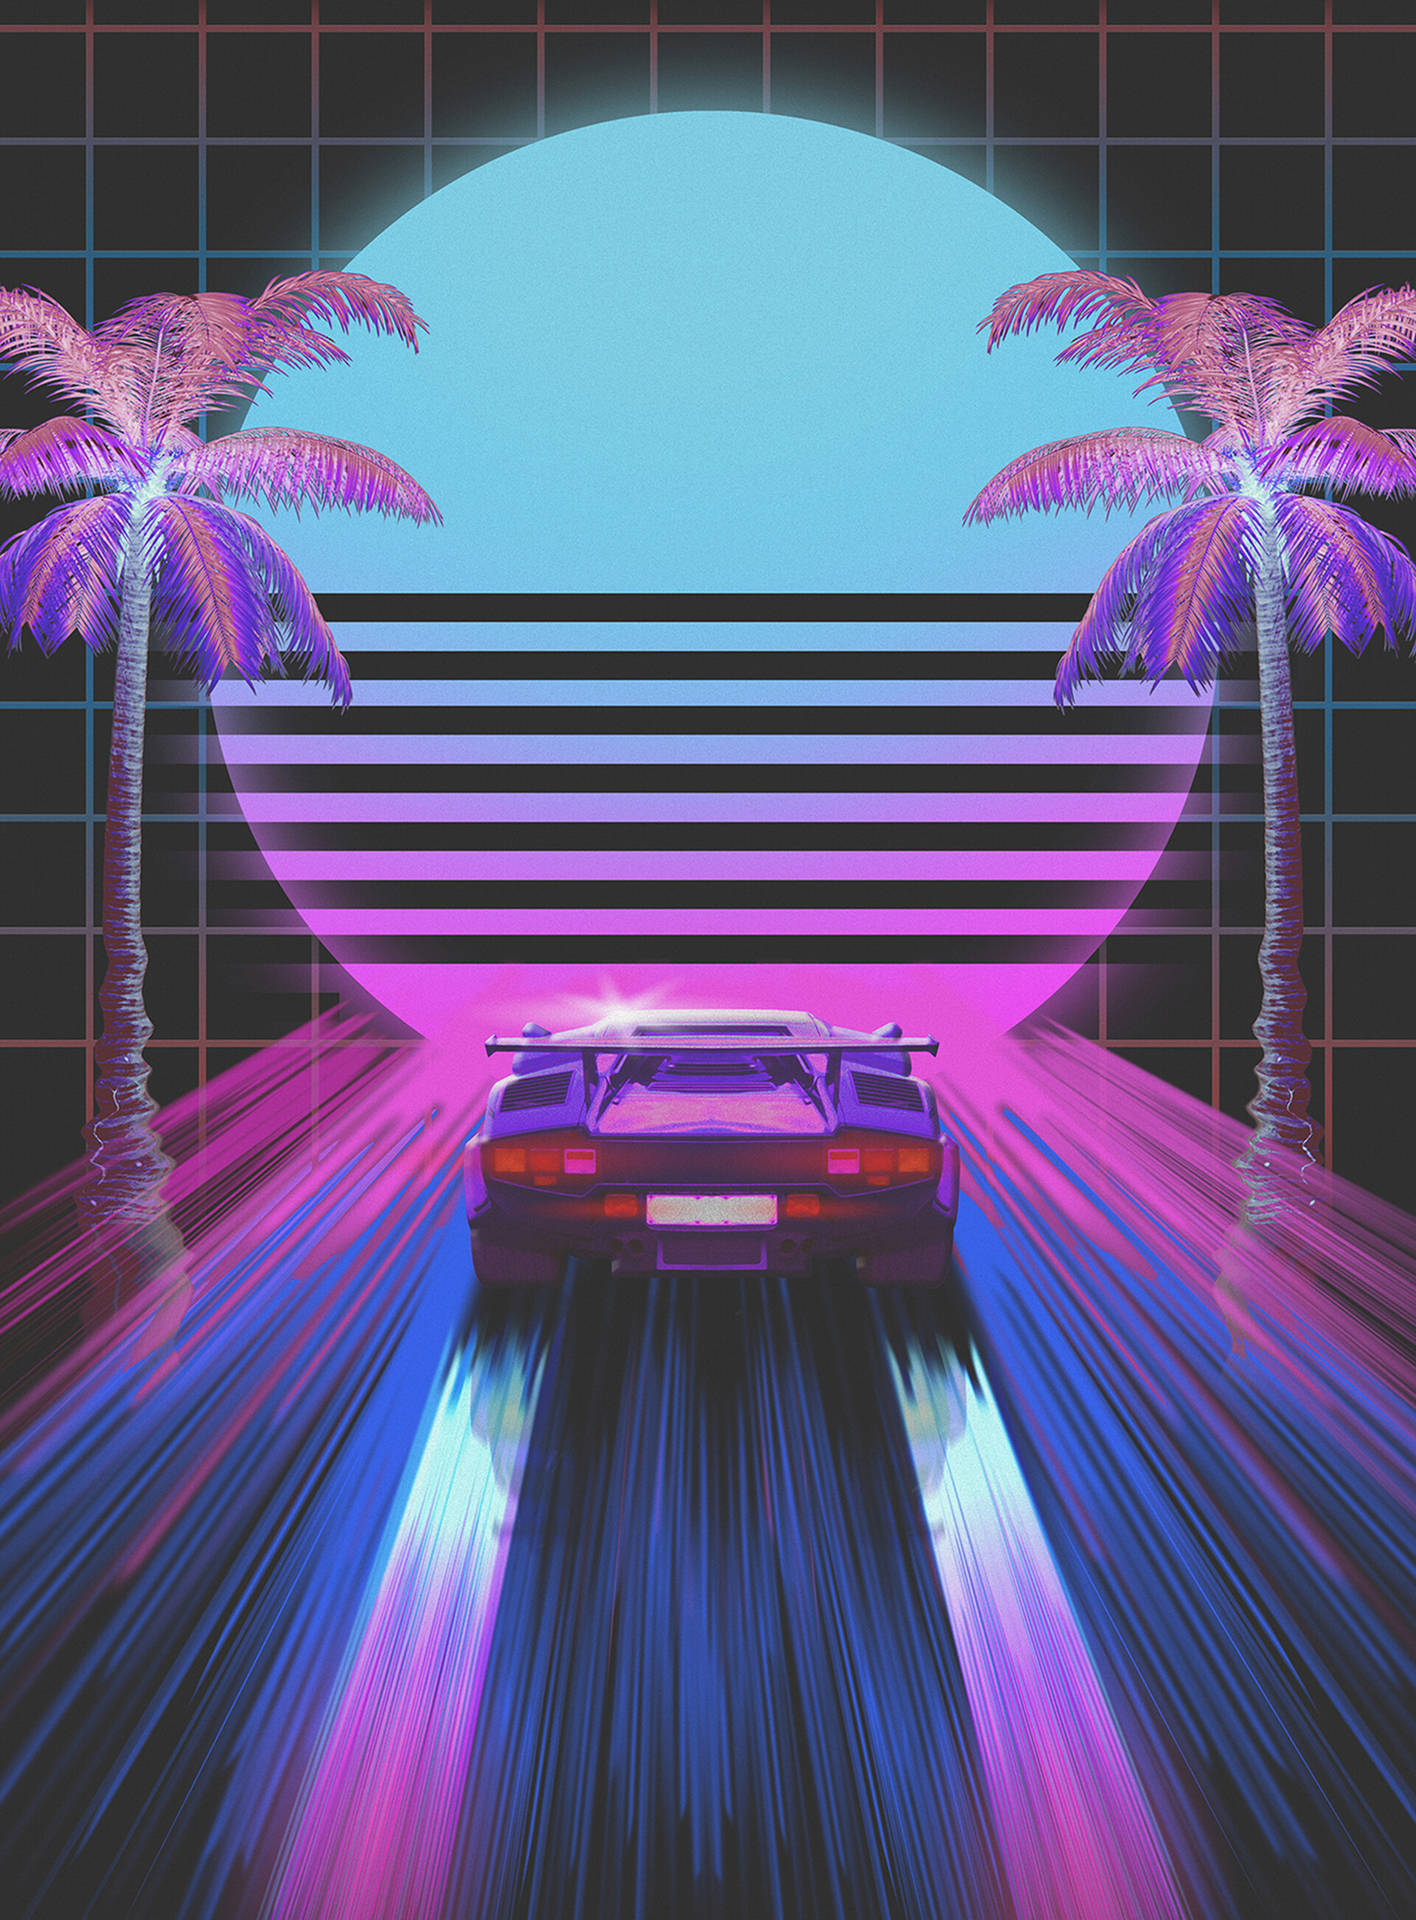 80s Style Car And Tropical Palm